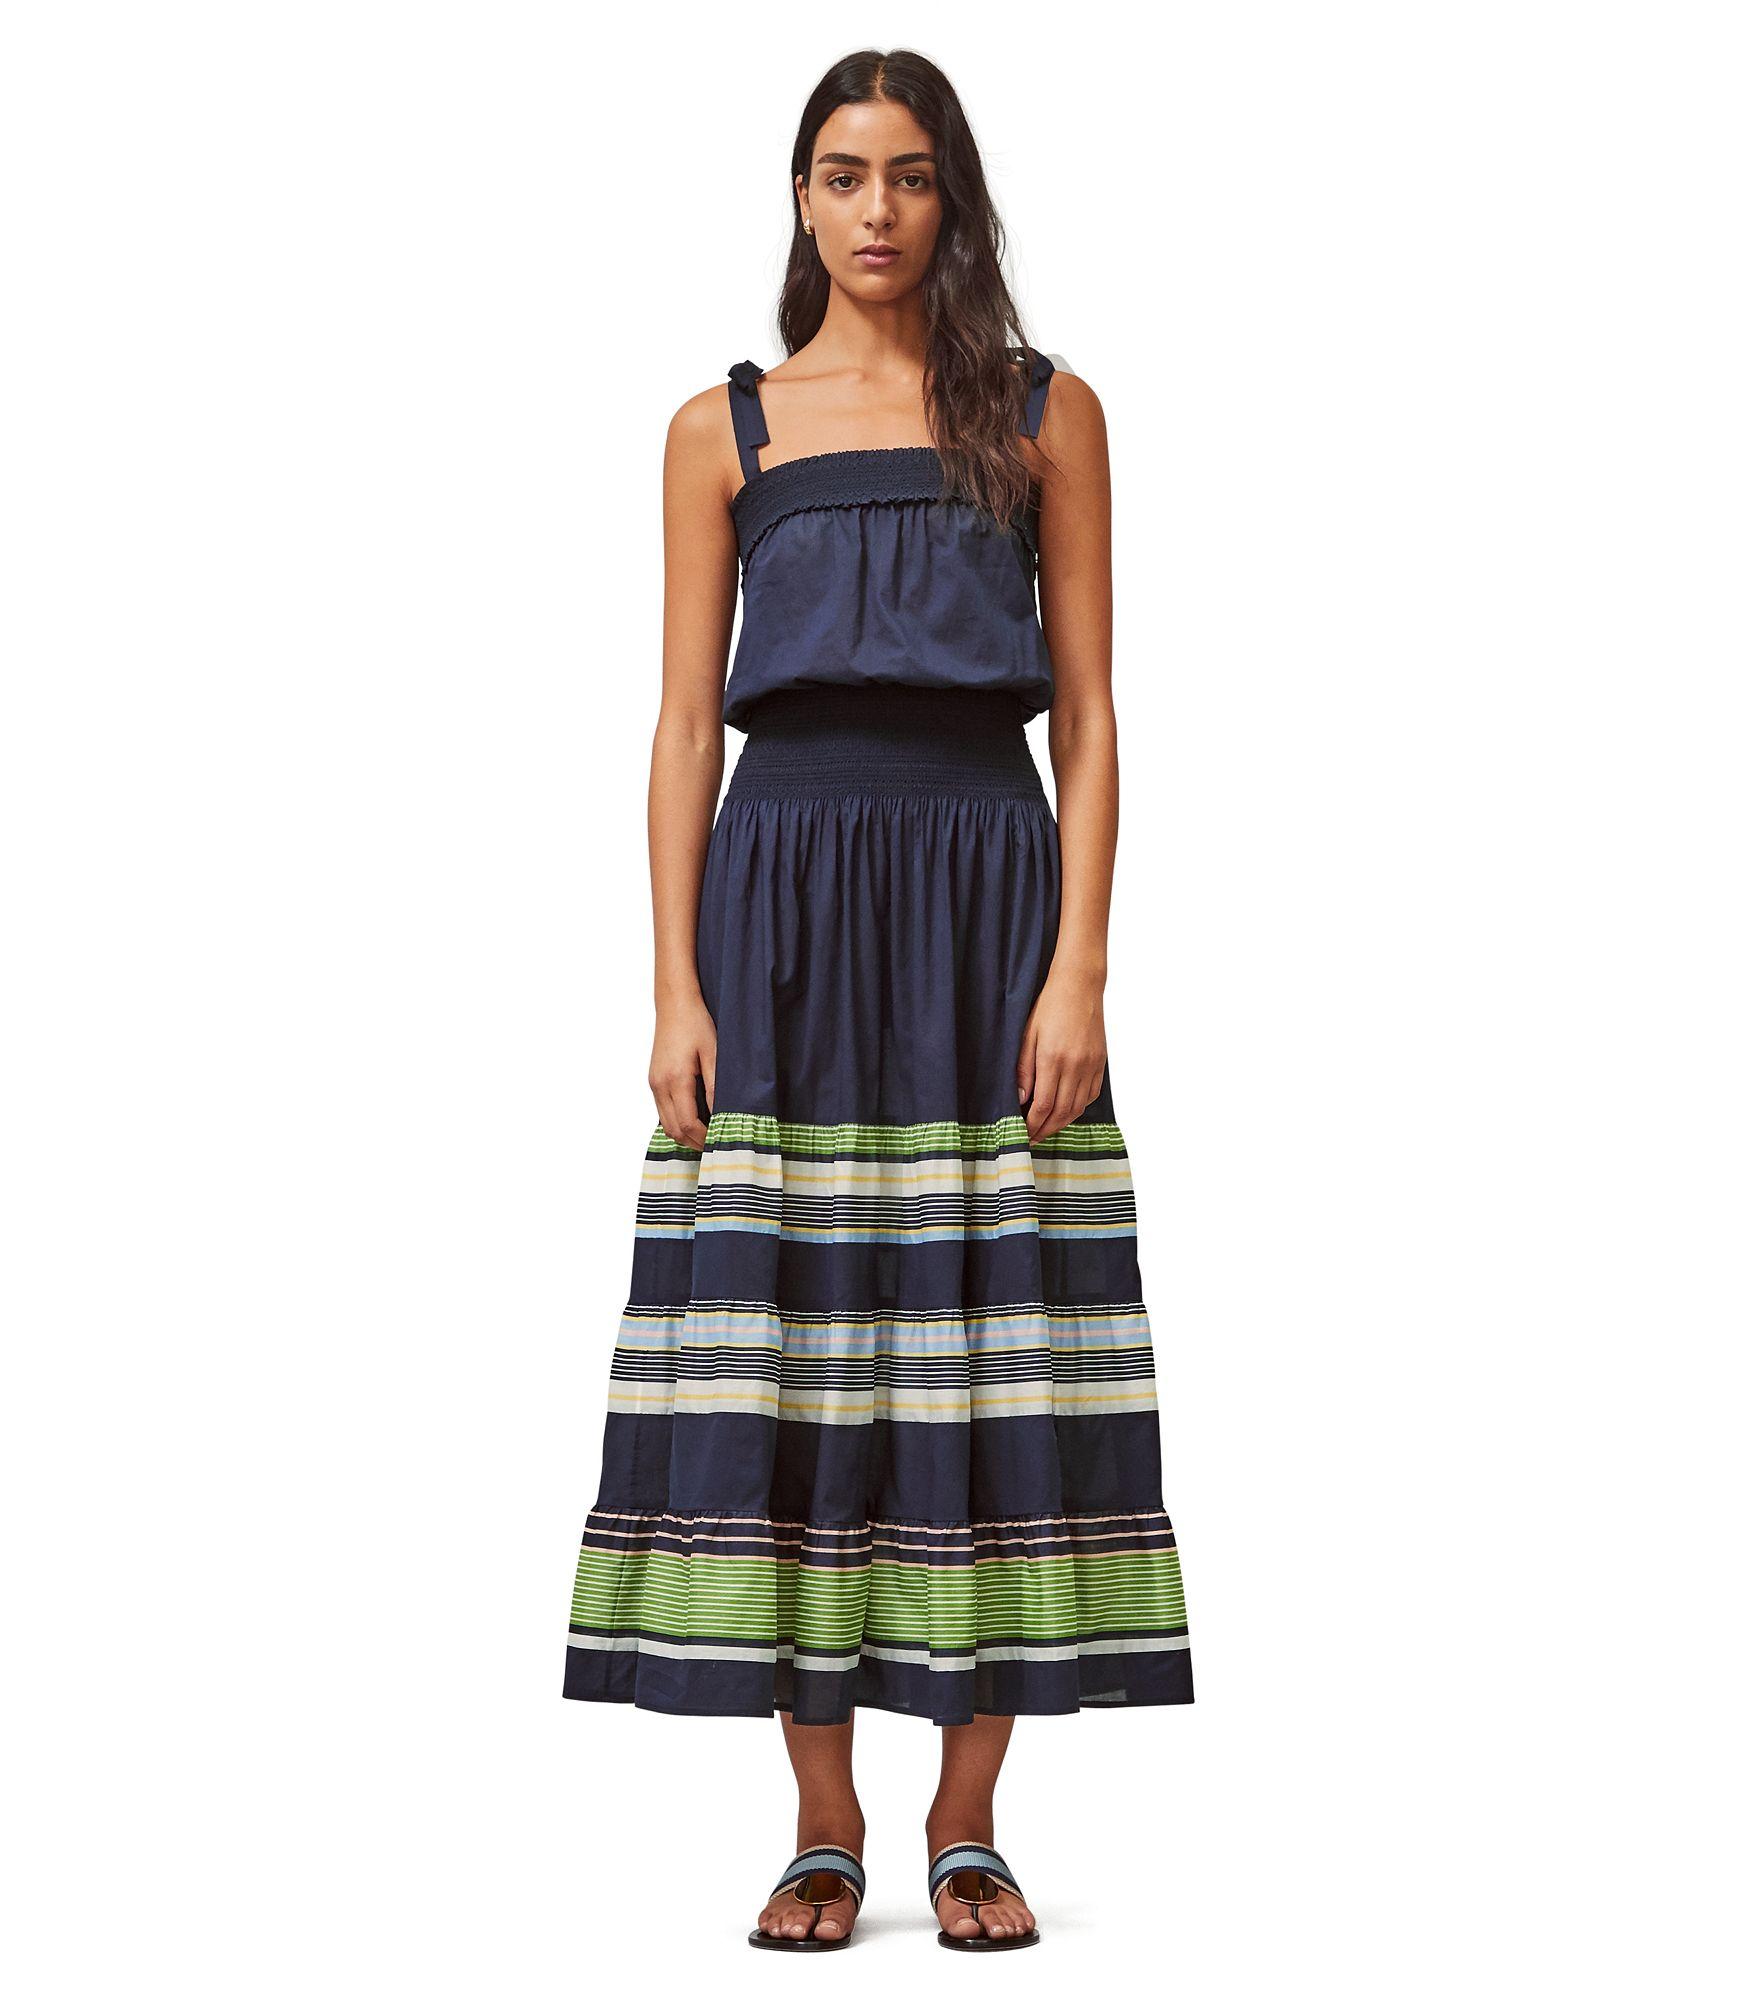 Tory Burch Cotton Smocked Sundress in Black (Blue) - Lyst